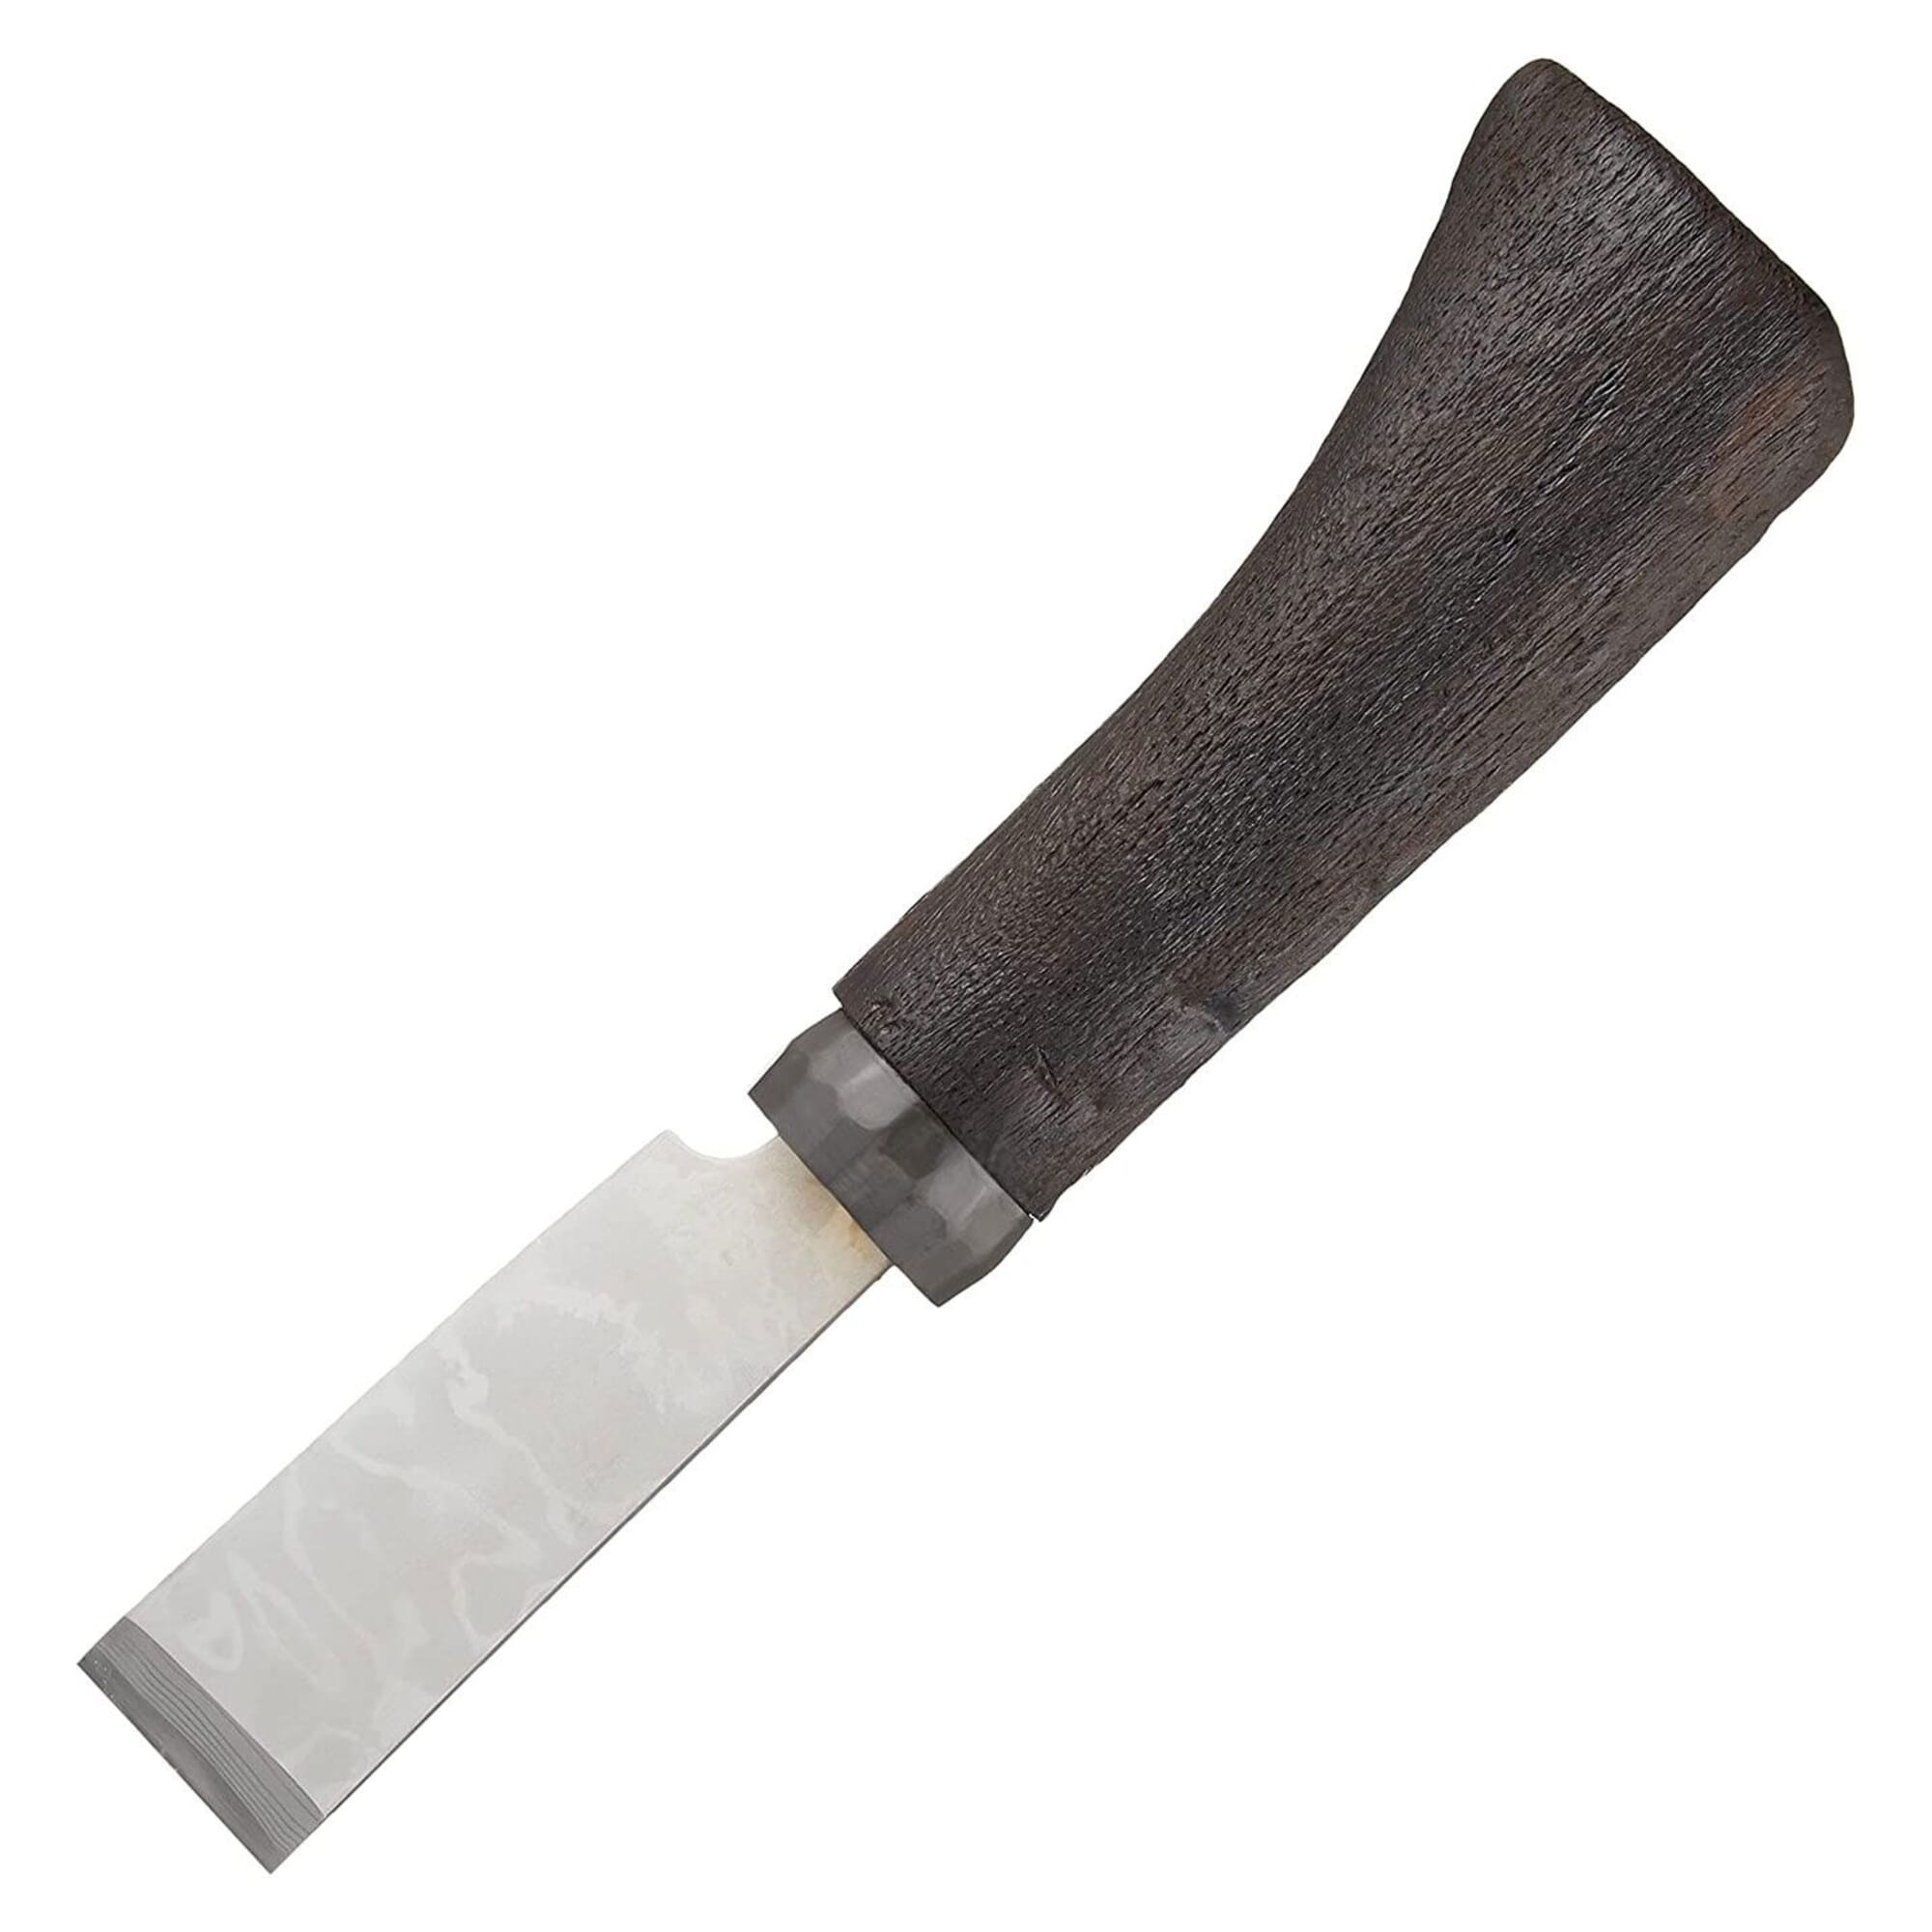 Leather Exacto Knife Blades, Leather Cutting Knifes